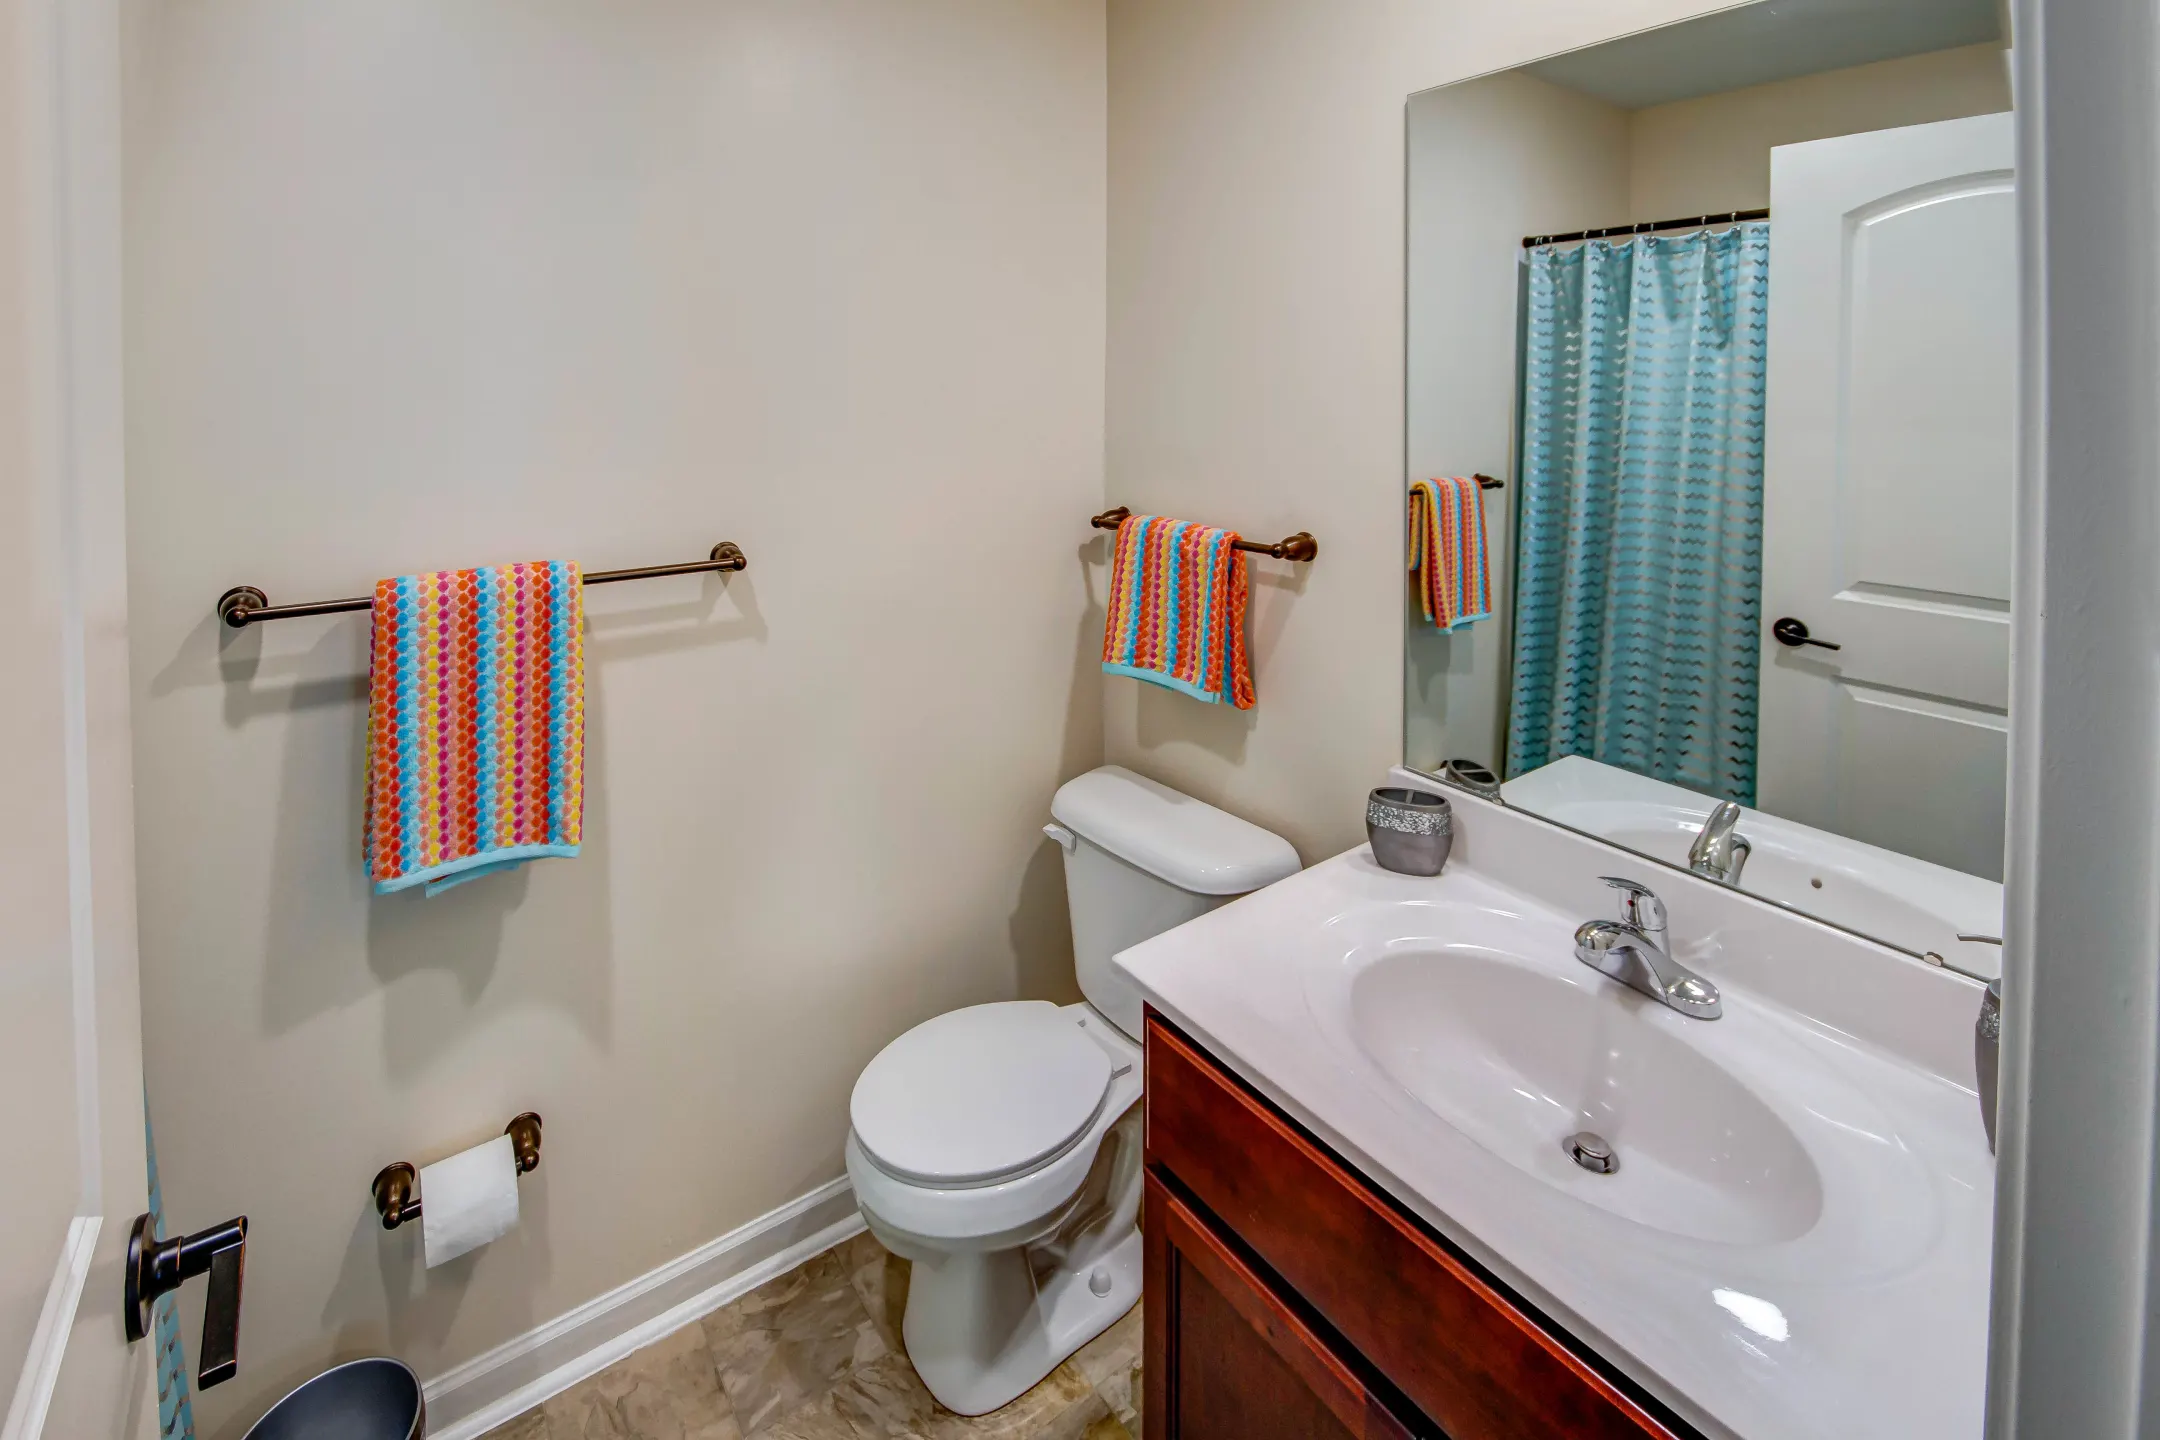 Bathroom - Nicholas Place Apartments - Middletown, OH